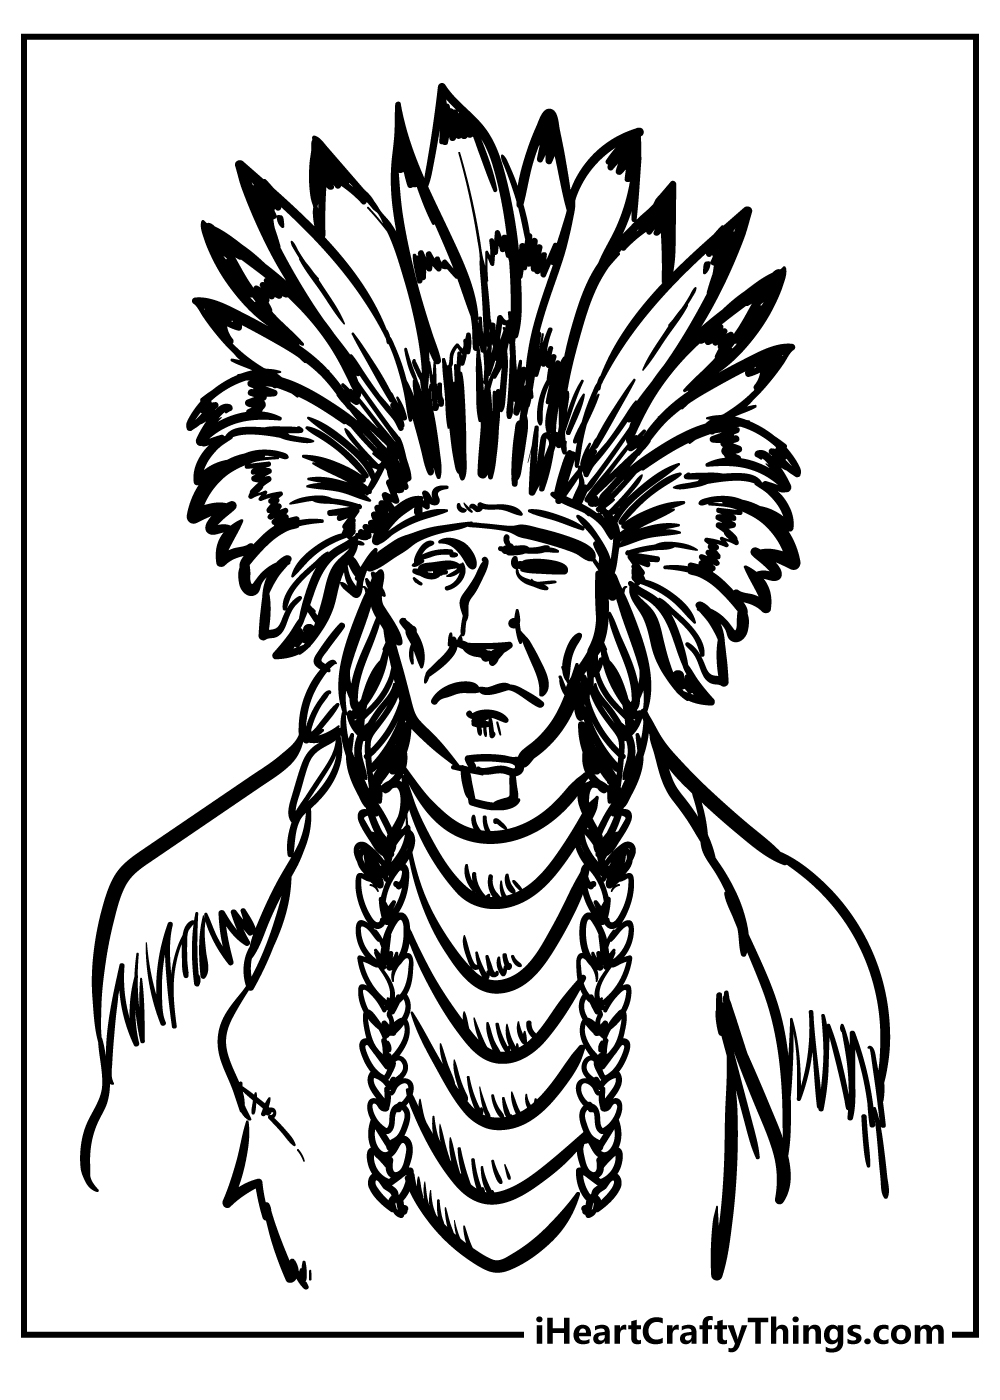 Native American Coloring Sheet for children free download